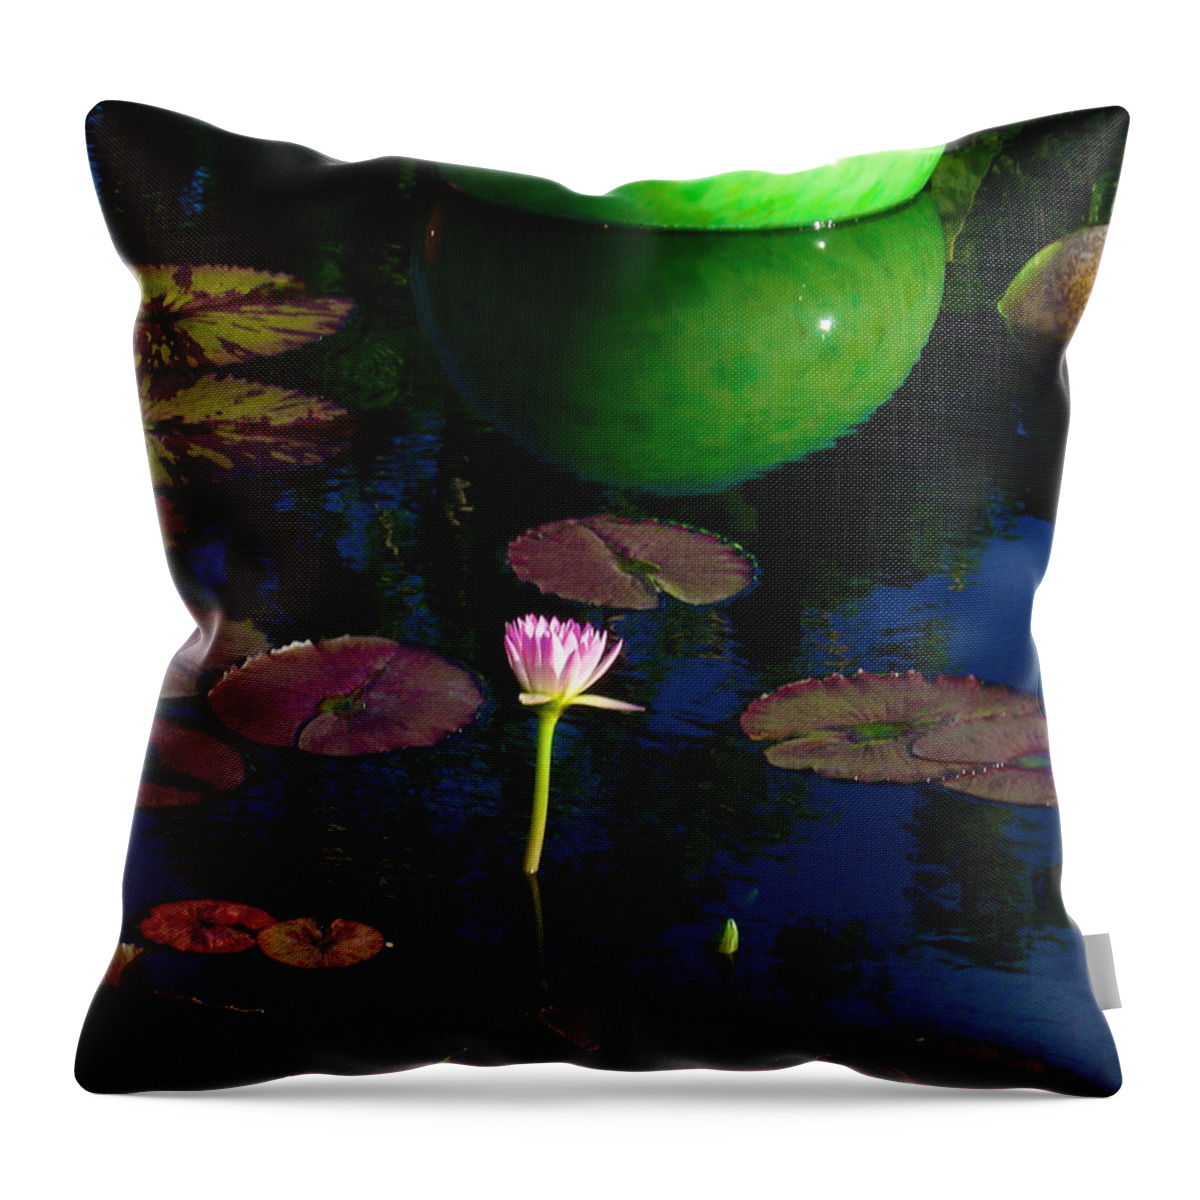 Art Portraits Throw Pillow featuring the photograph Waterlily Reflection by Kristin Hatt